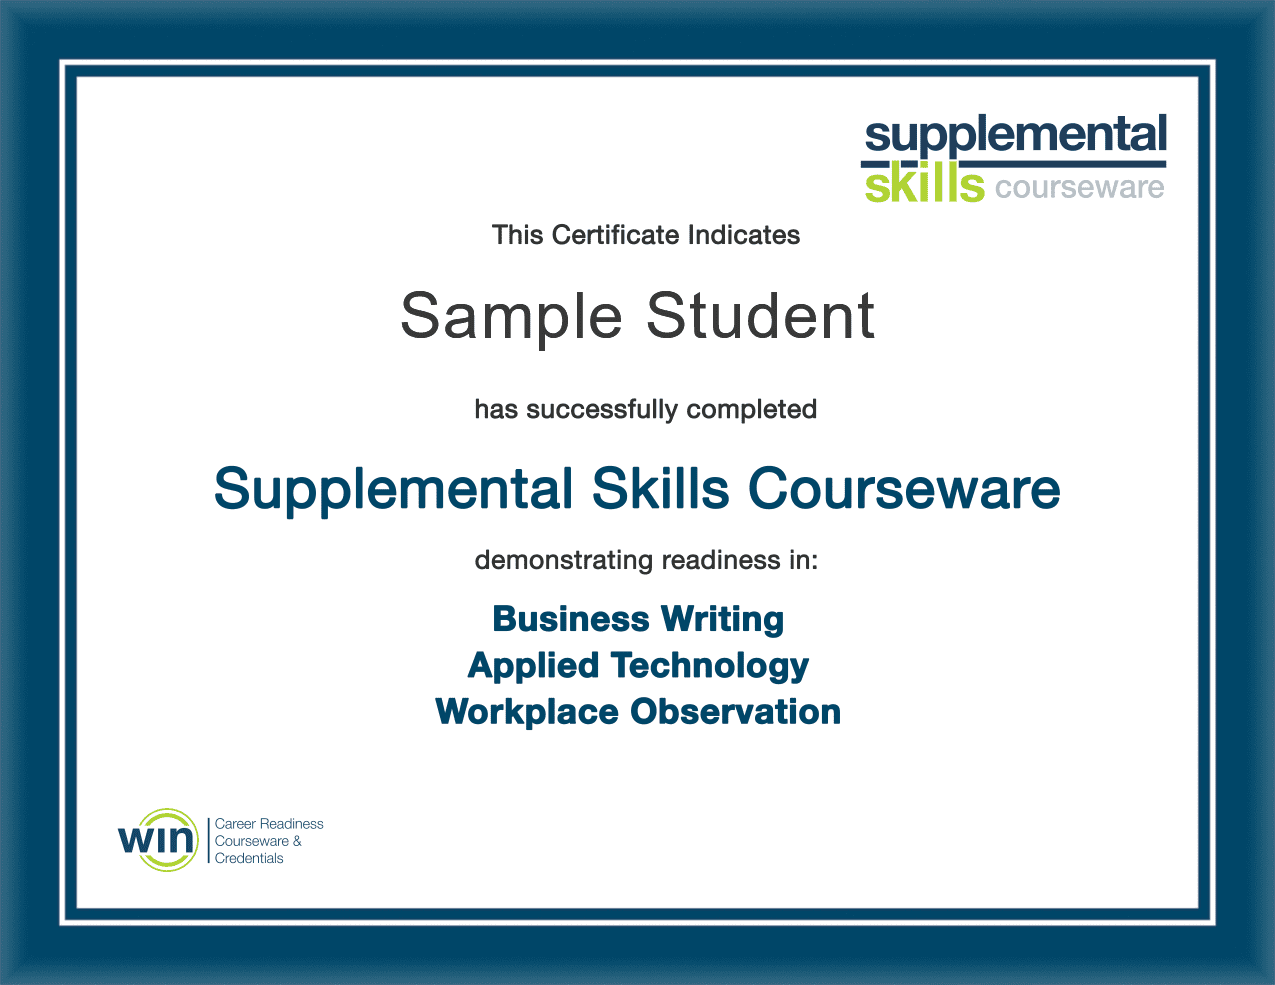 Supplemental Skills courseware certificate of completion